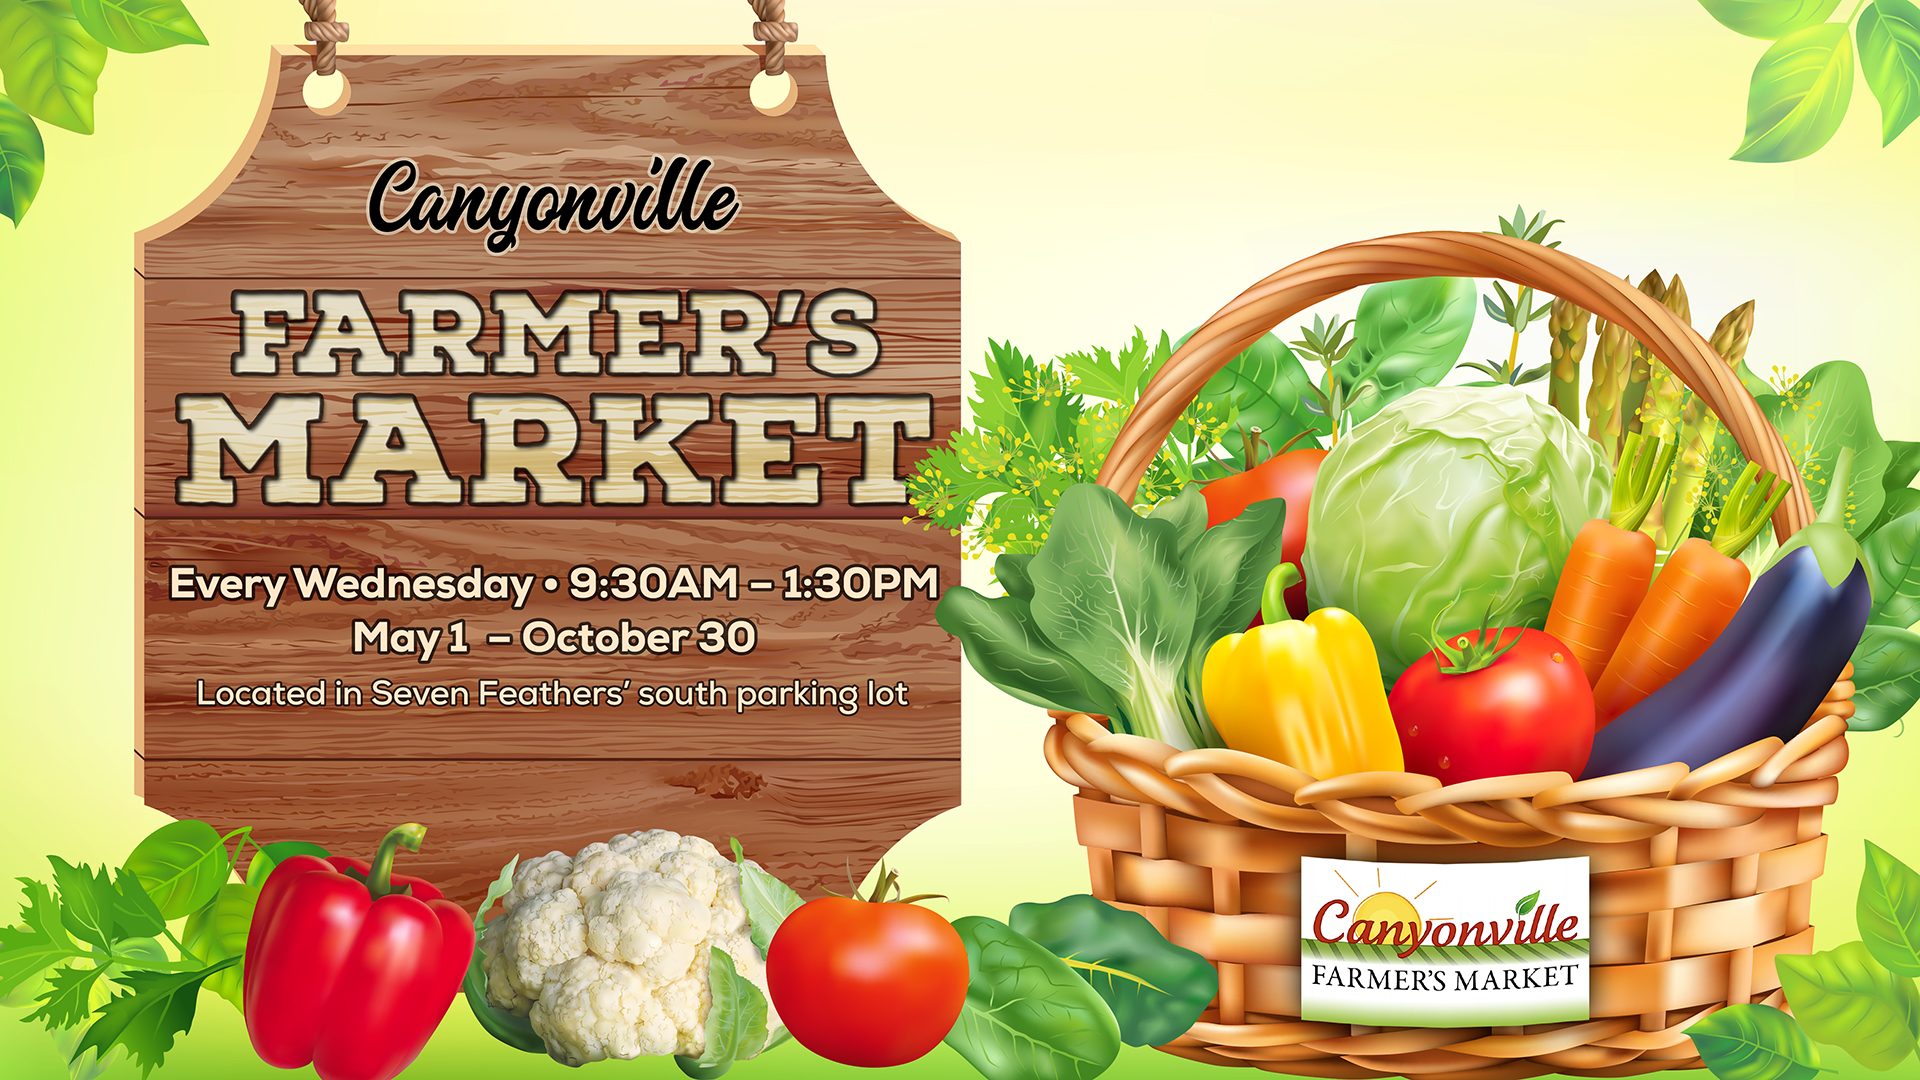 Seven Feathers Casino Resort Is Proud To Host The Canyonville Farmer's Market